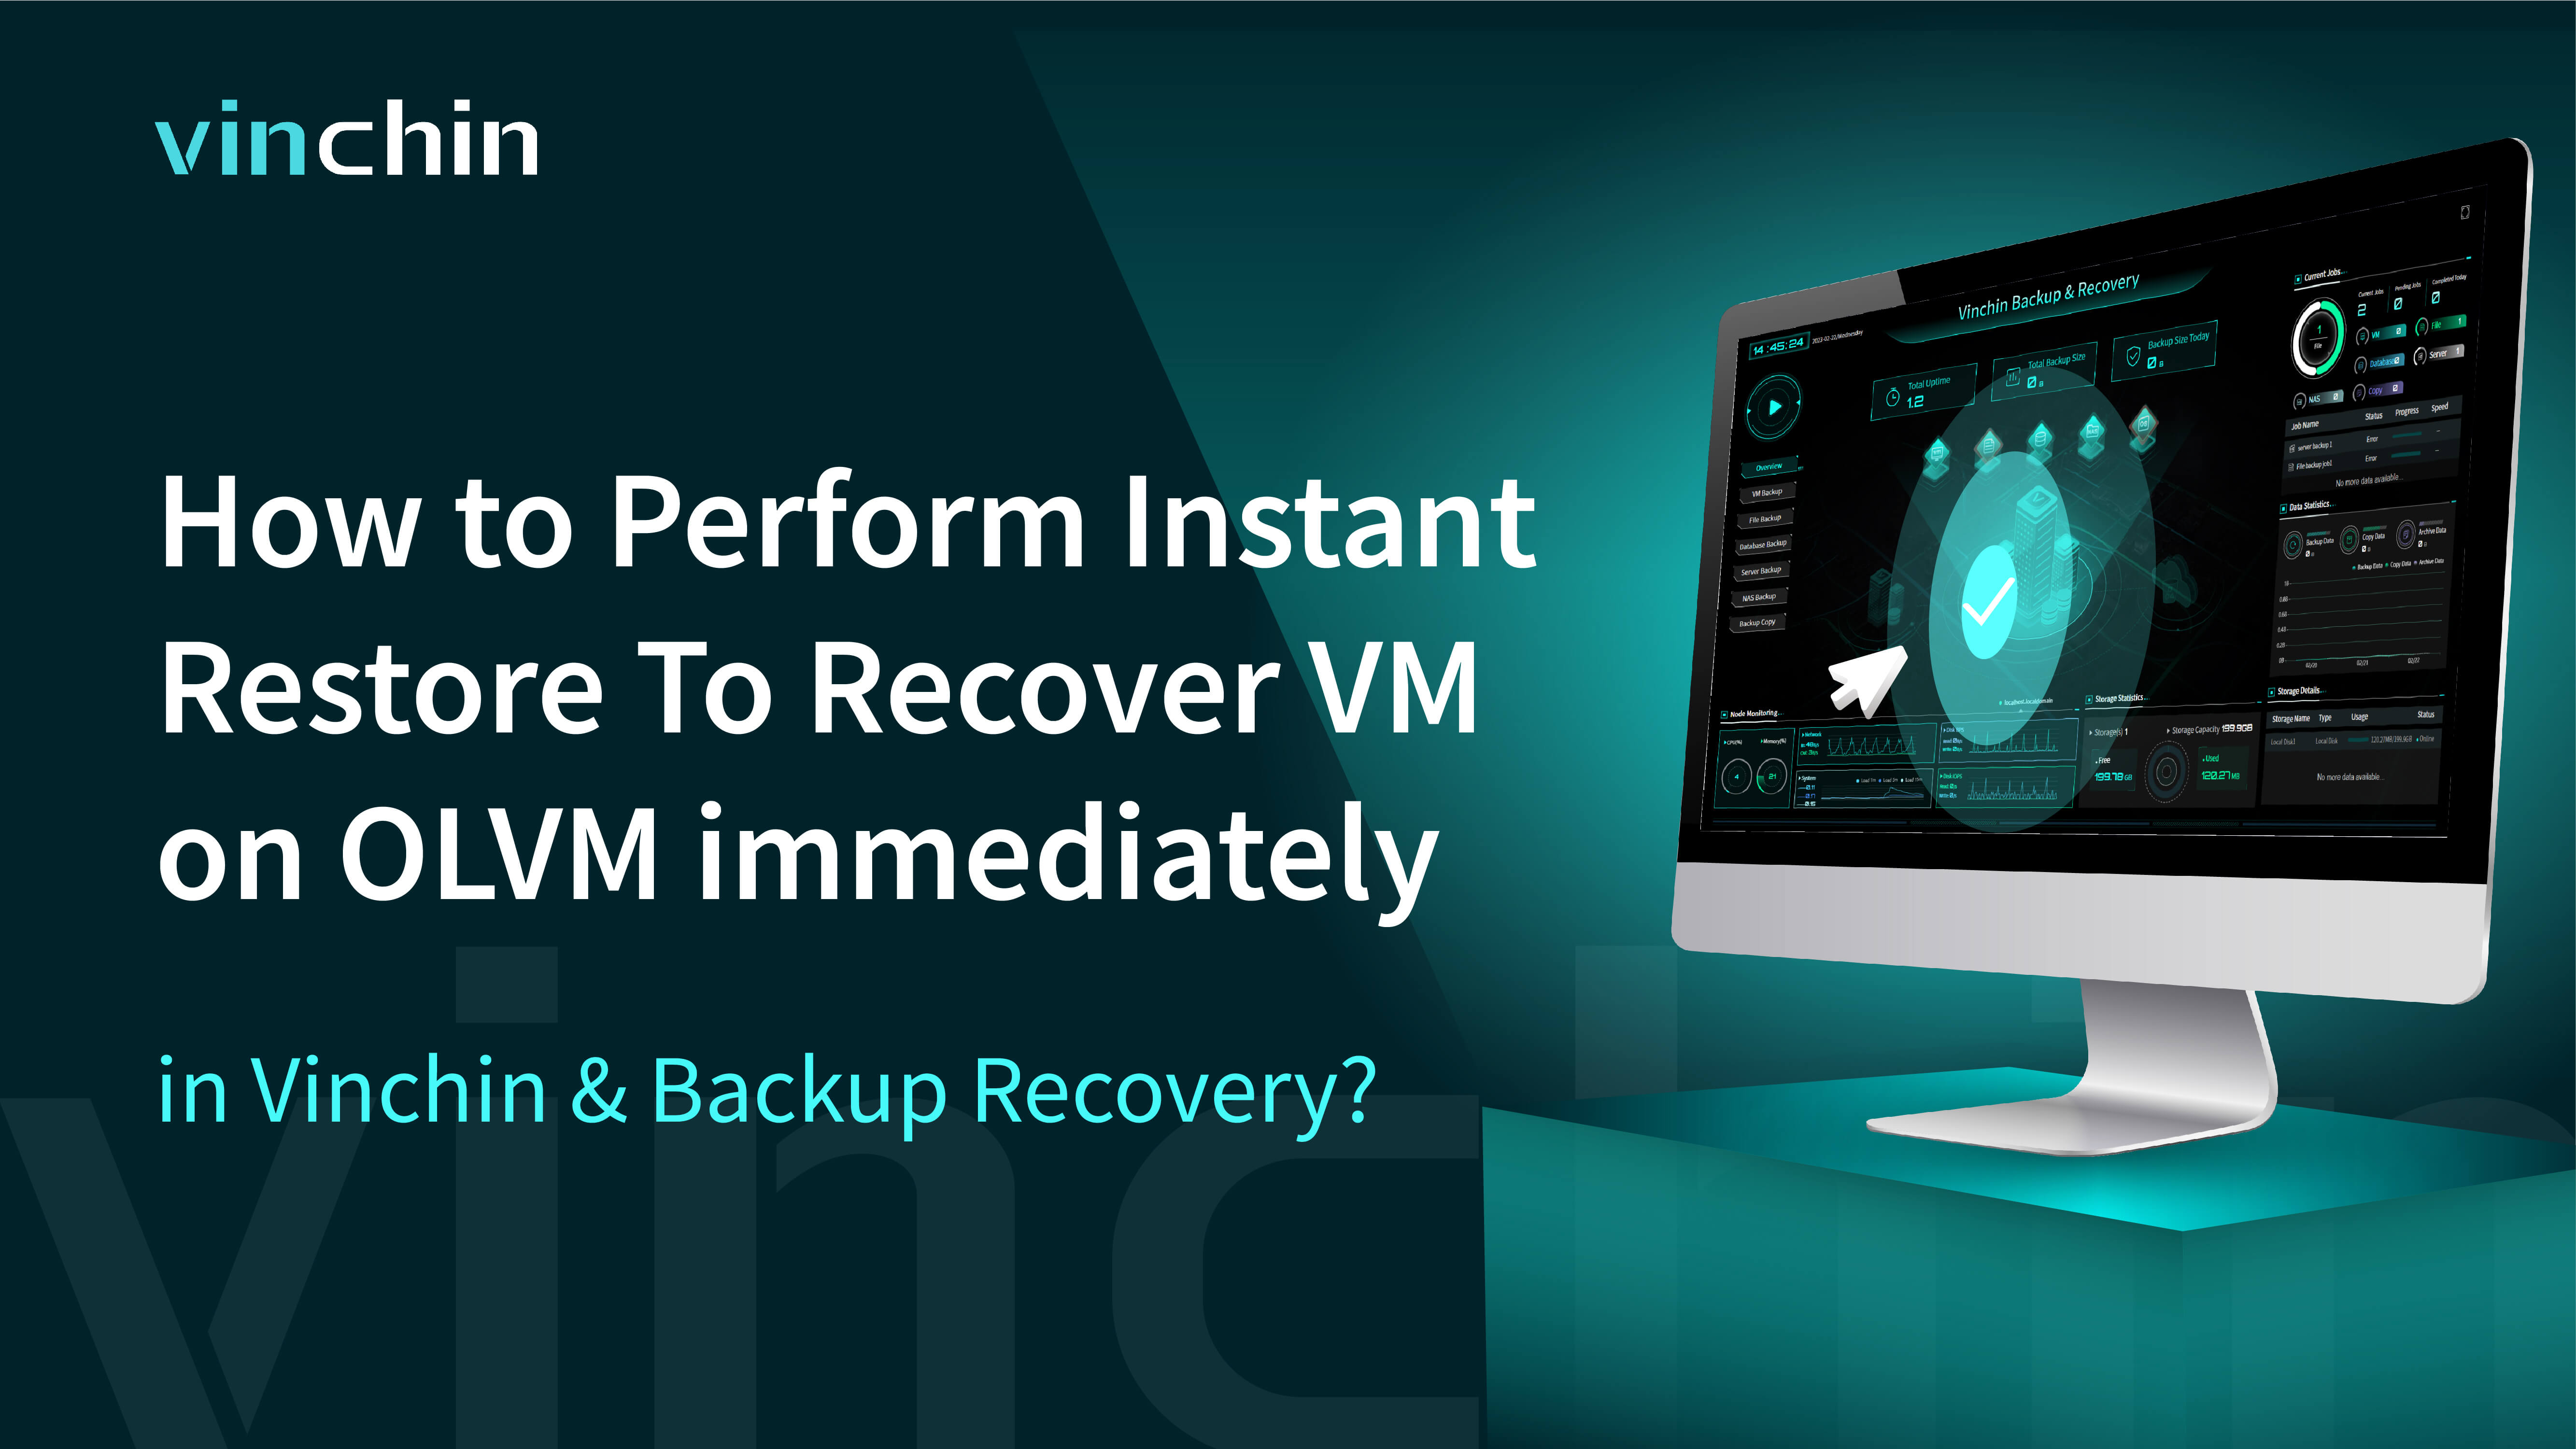 How to Perform Instant Restore to Recover VM on OLVM immediately in Vinchin Backup & Recovery?